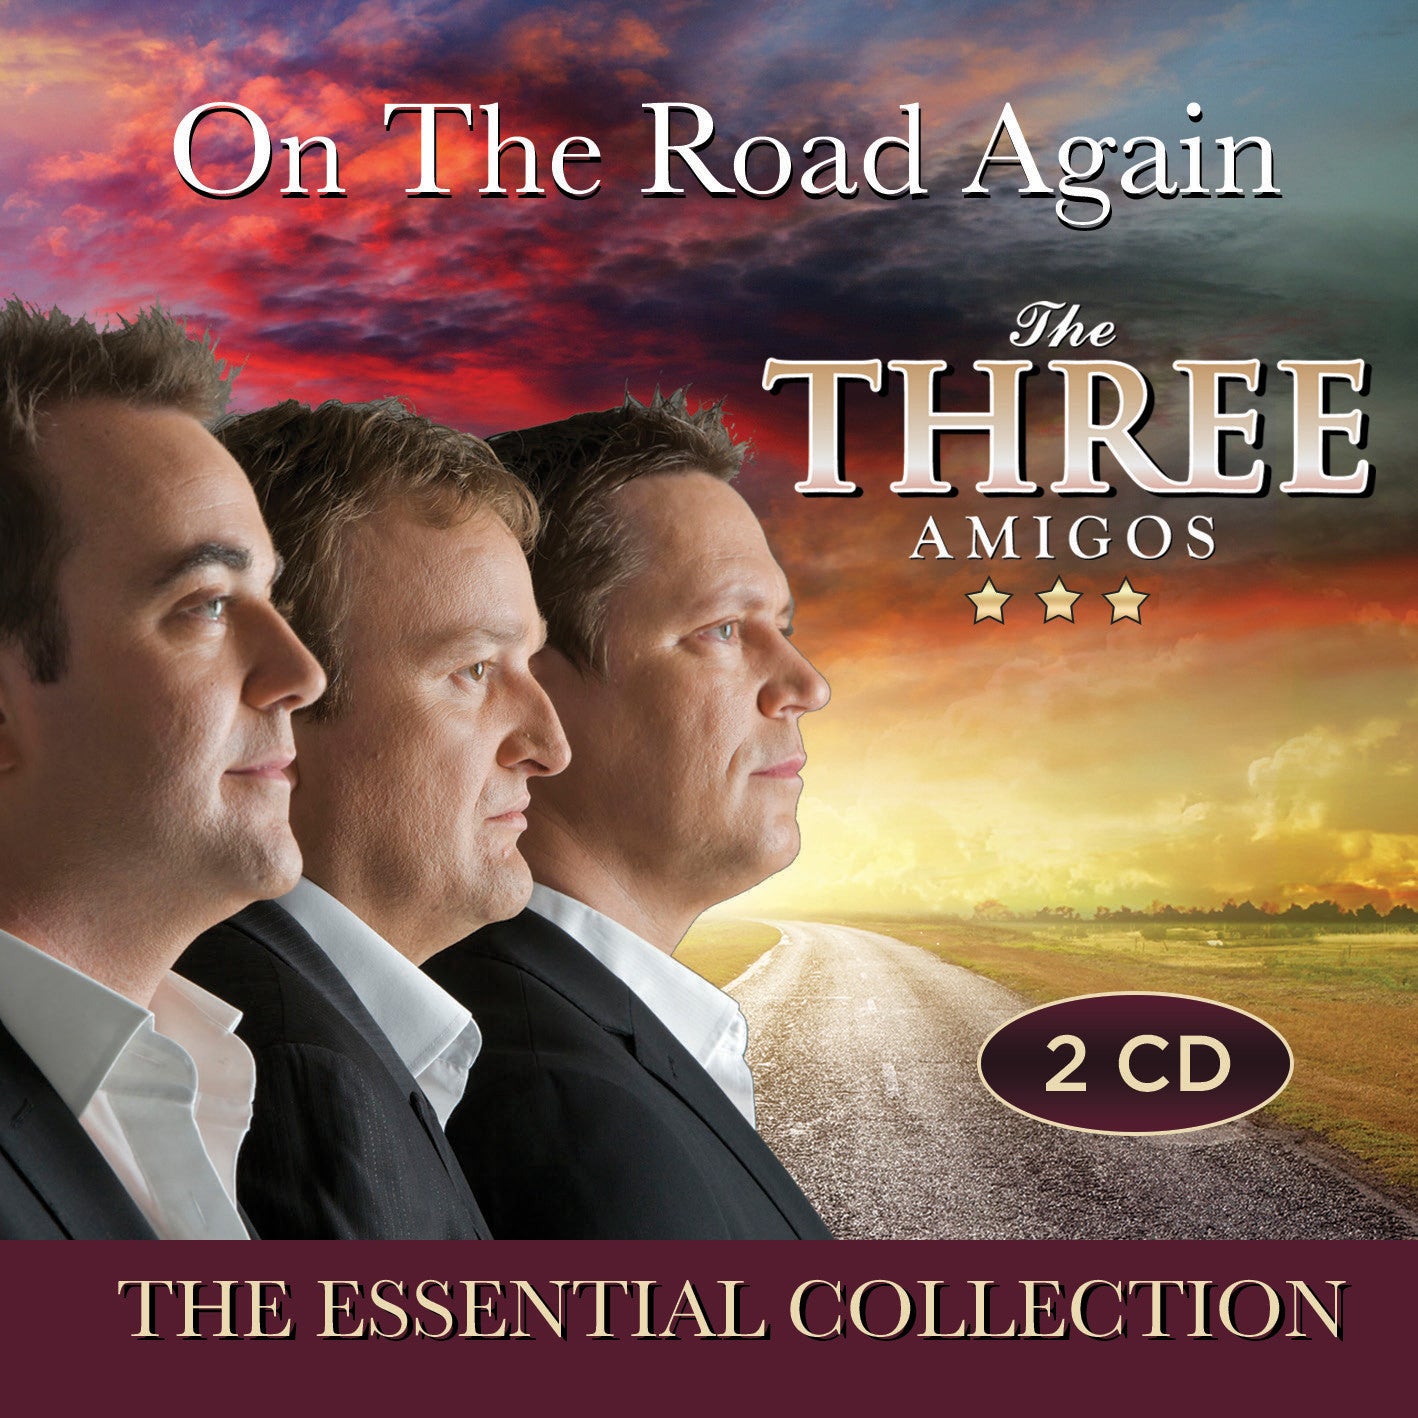 On The Road Again (The Essential Collection) - The Three Amigos [2CD]